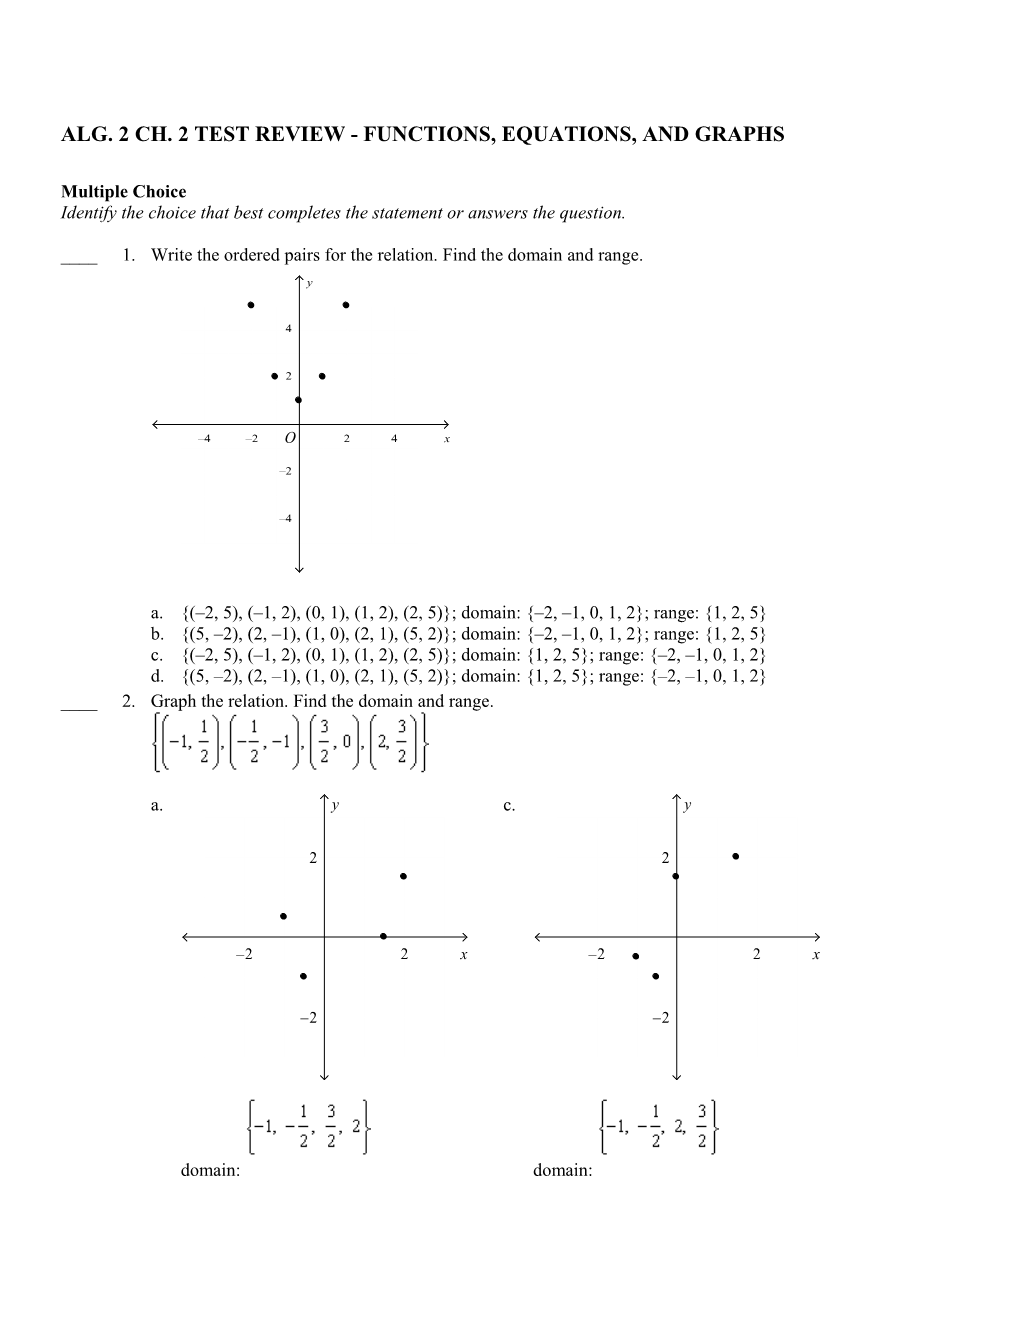 Alg. 2 Ch. 2 Test Review - Functions, Equations, and Graphs